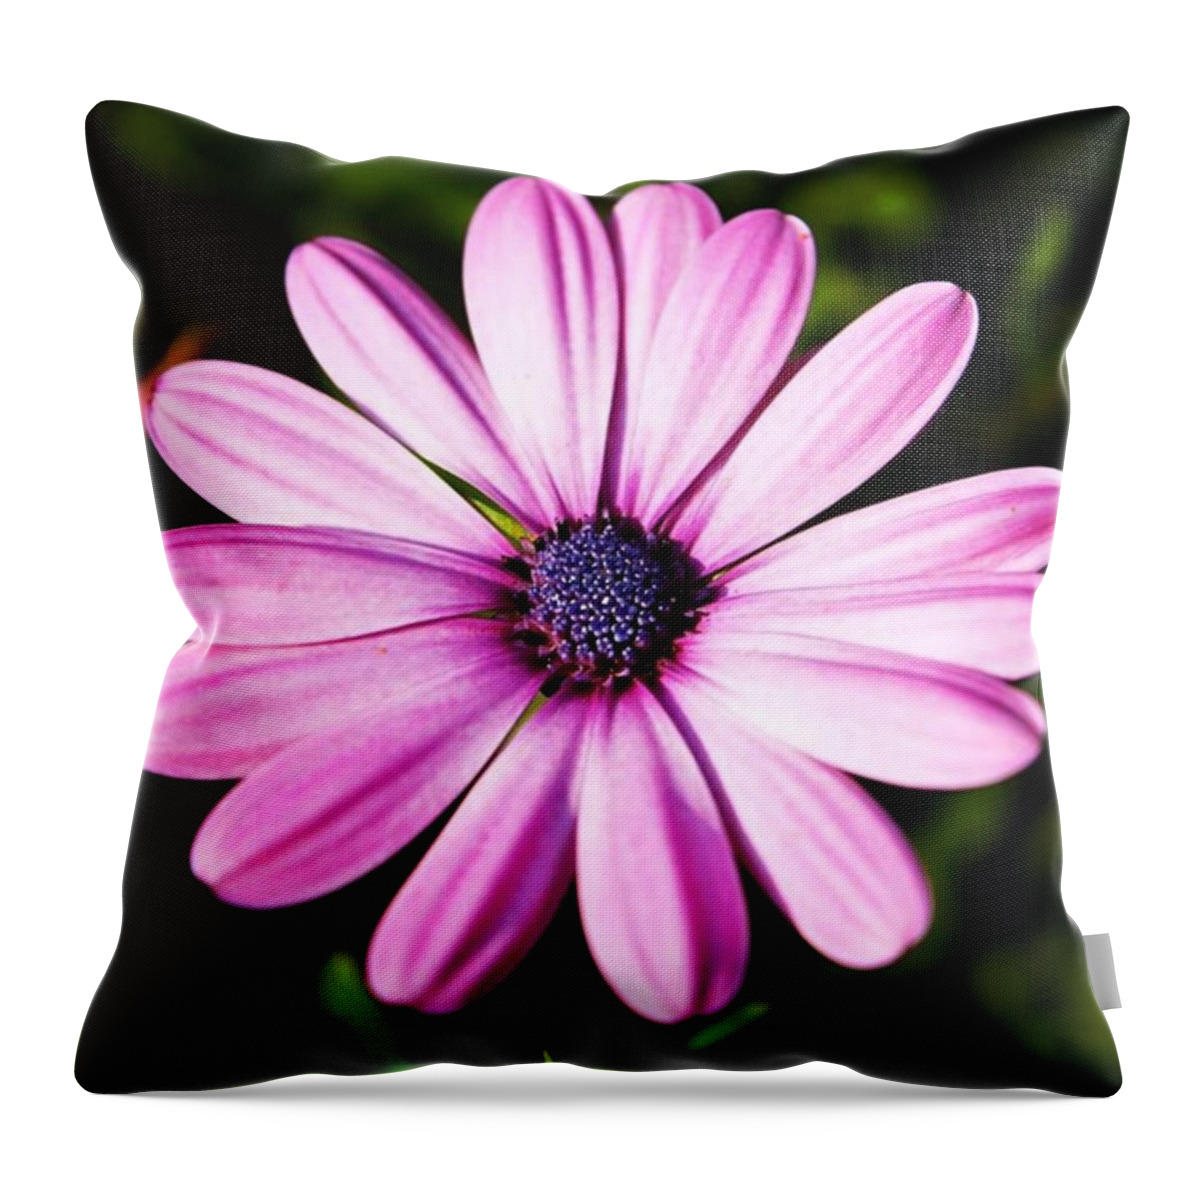 Daisy Throw Pillow featuring the photograph Lo Fi Daisy by Justin Connor